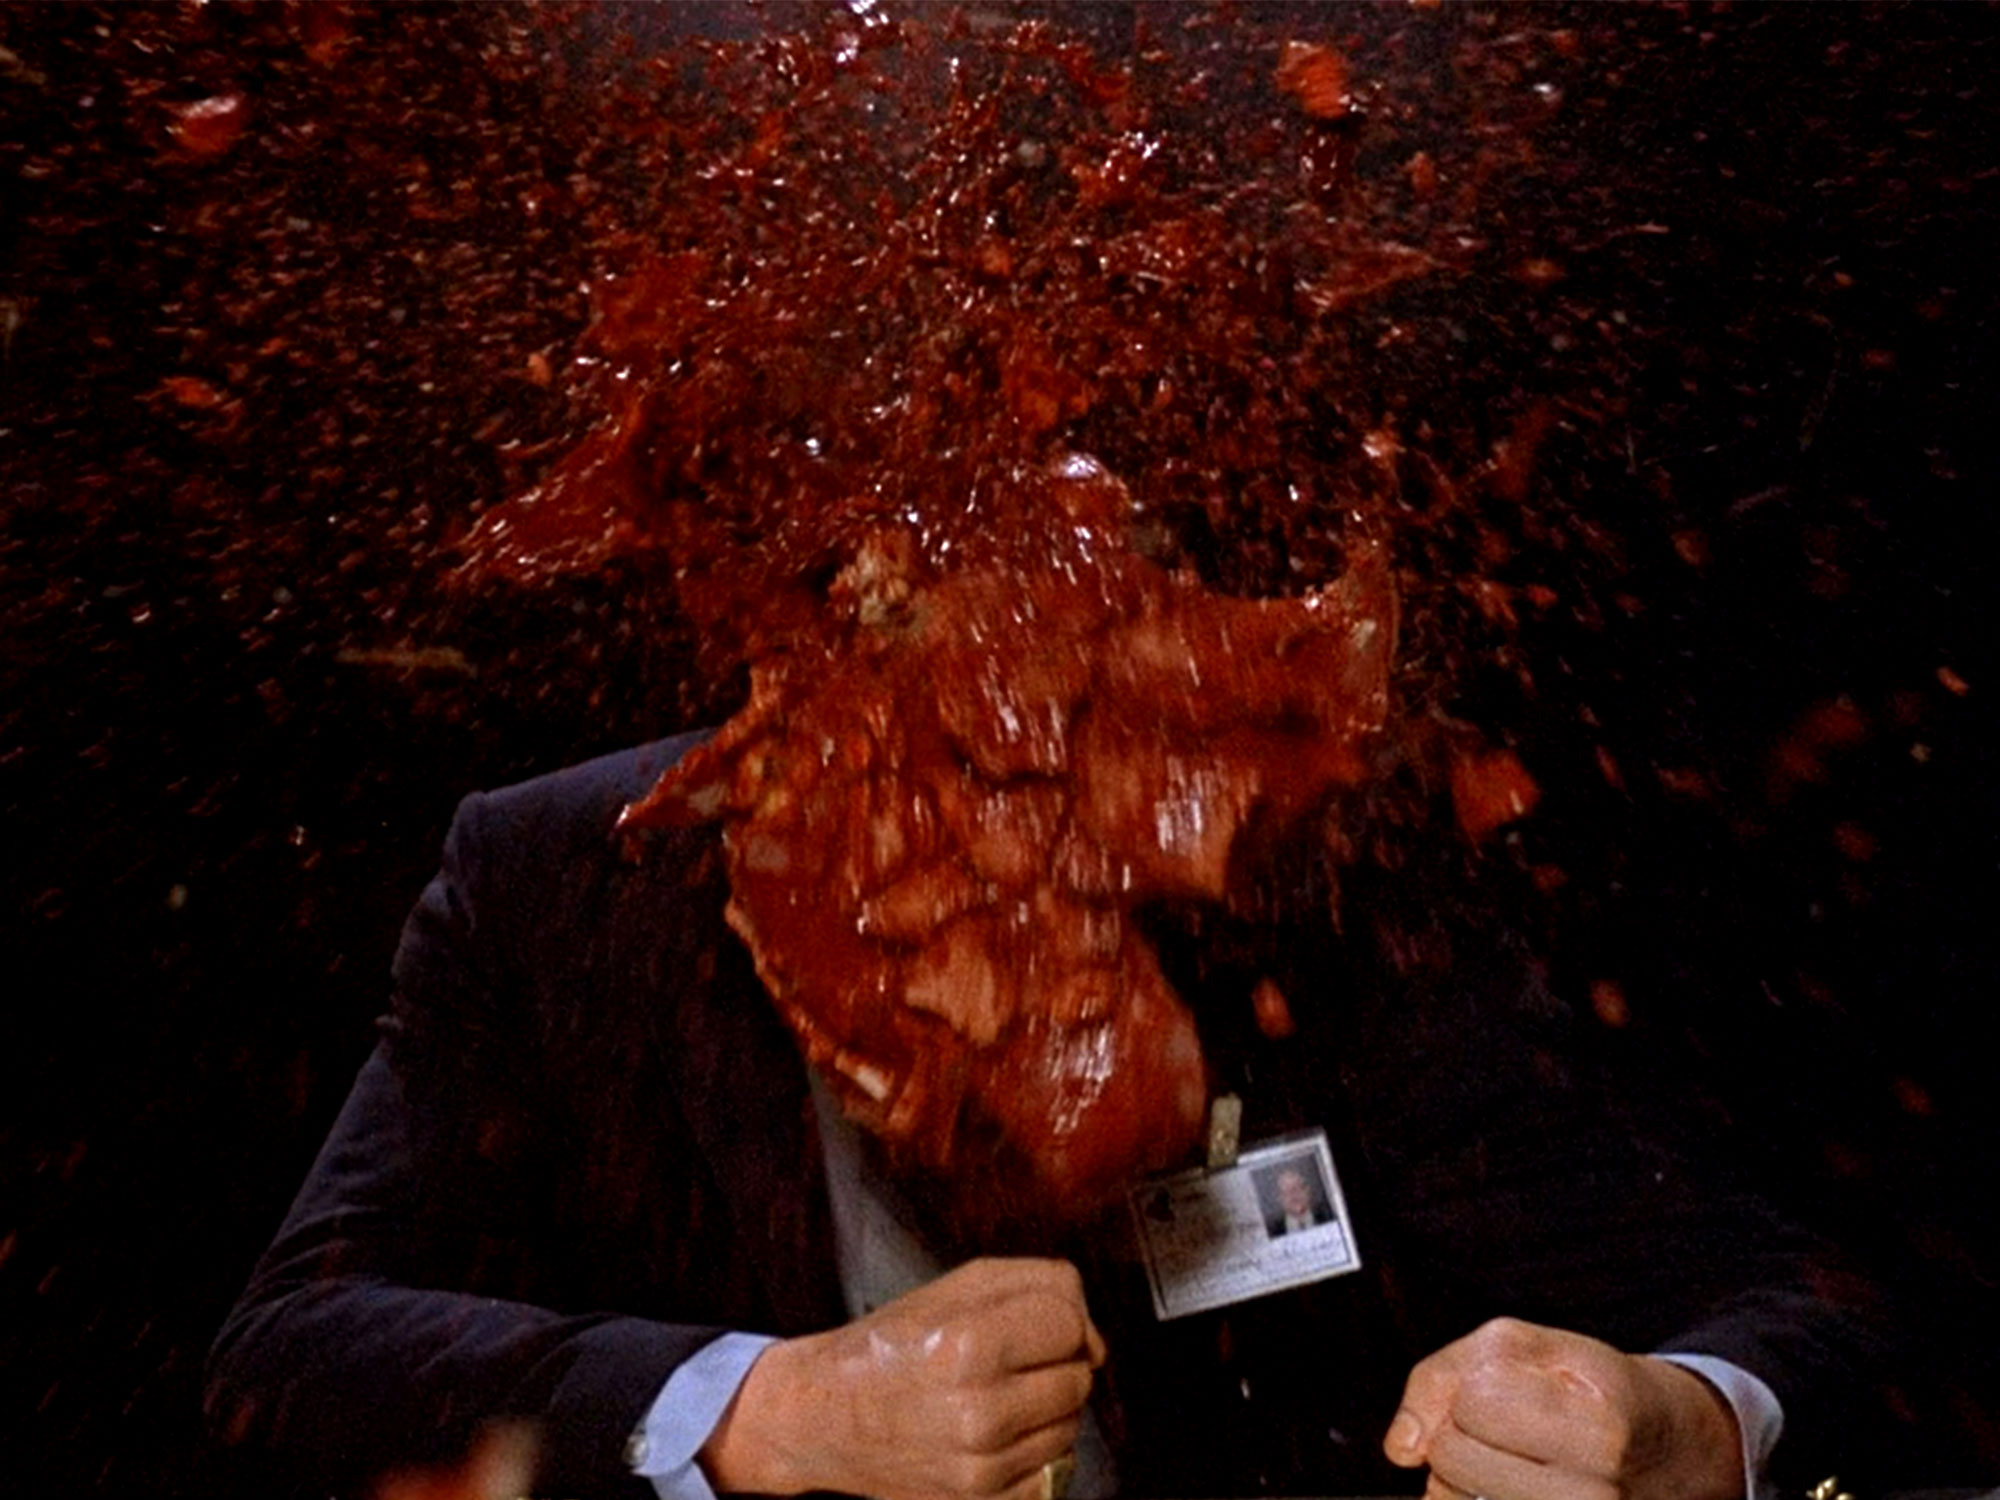 The mind-blowing legacy of David Cronenberg's Scanners